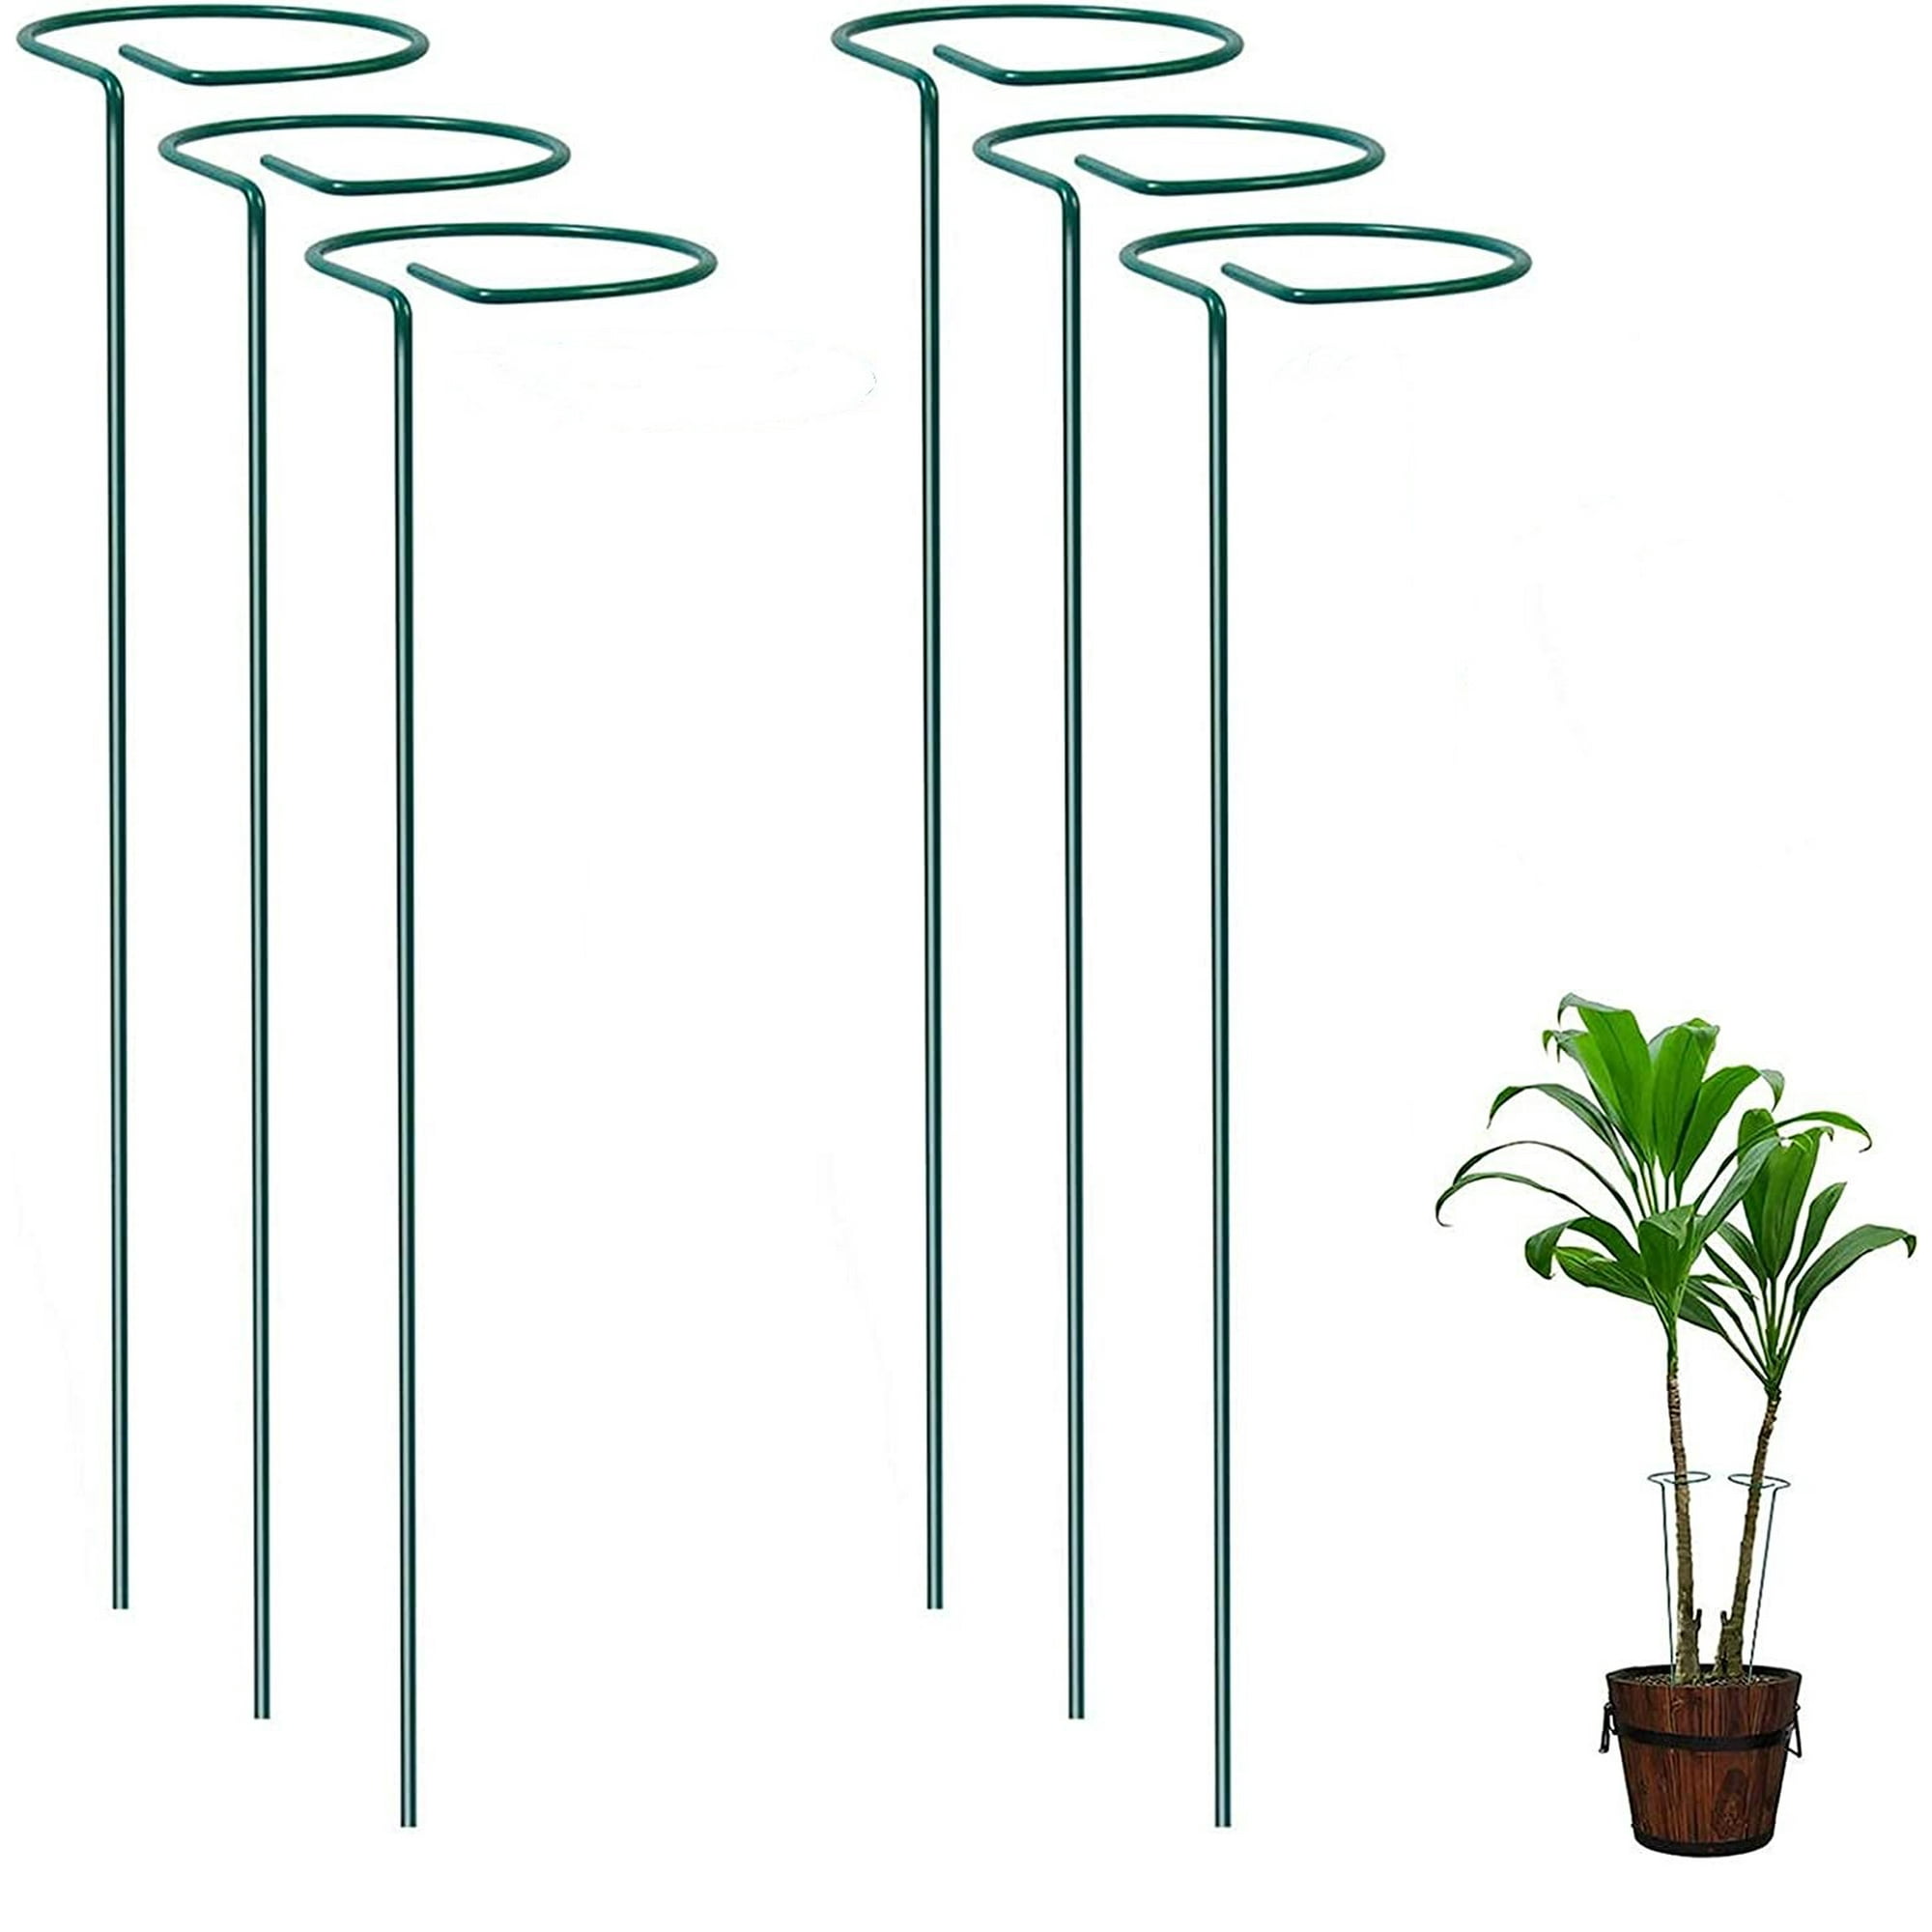 TRIANU 6 Pack Plant Support Stakes 11.8" Garden Single Stem Amaryllis Plant Cage Metal Support Rings for Peony Lily Orchid Rose Potted Flower Stem, Green